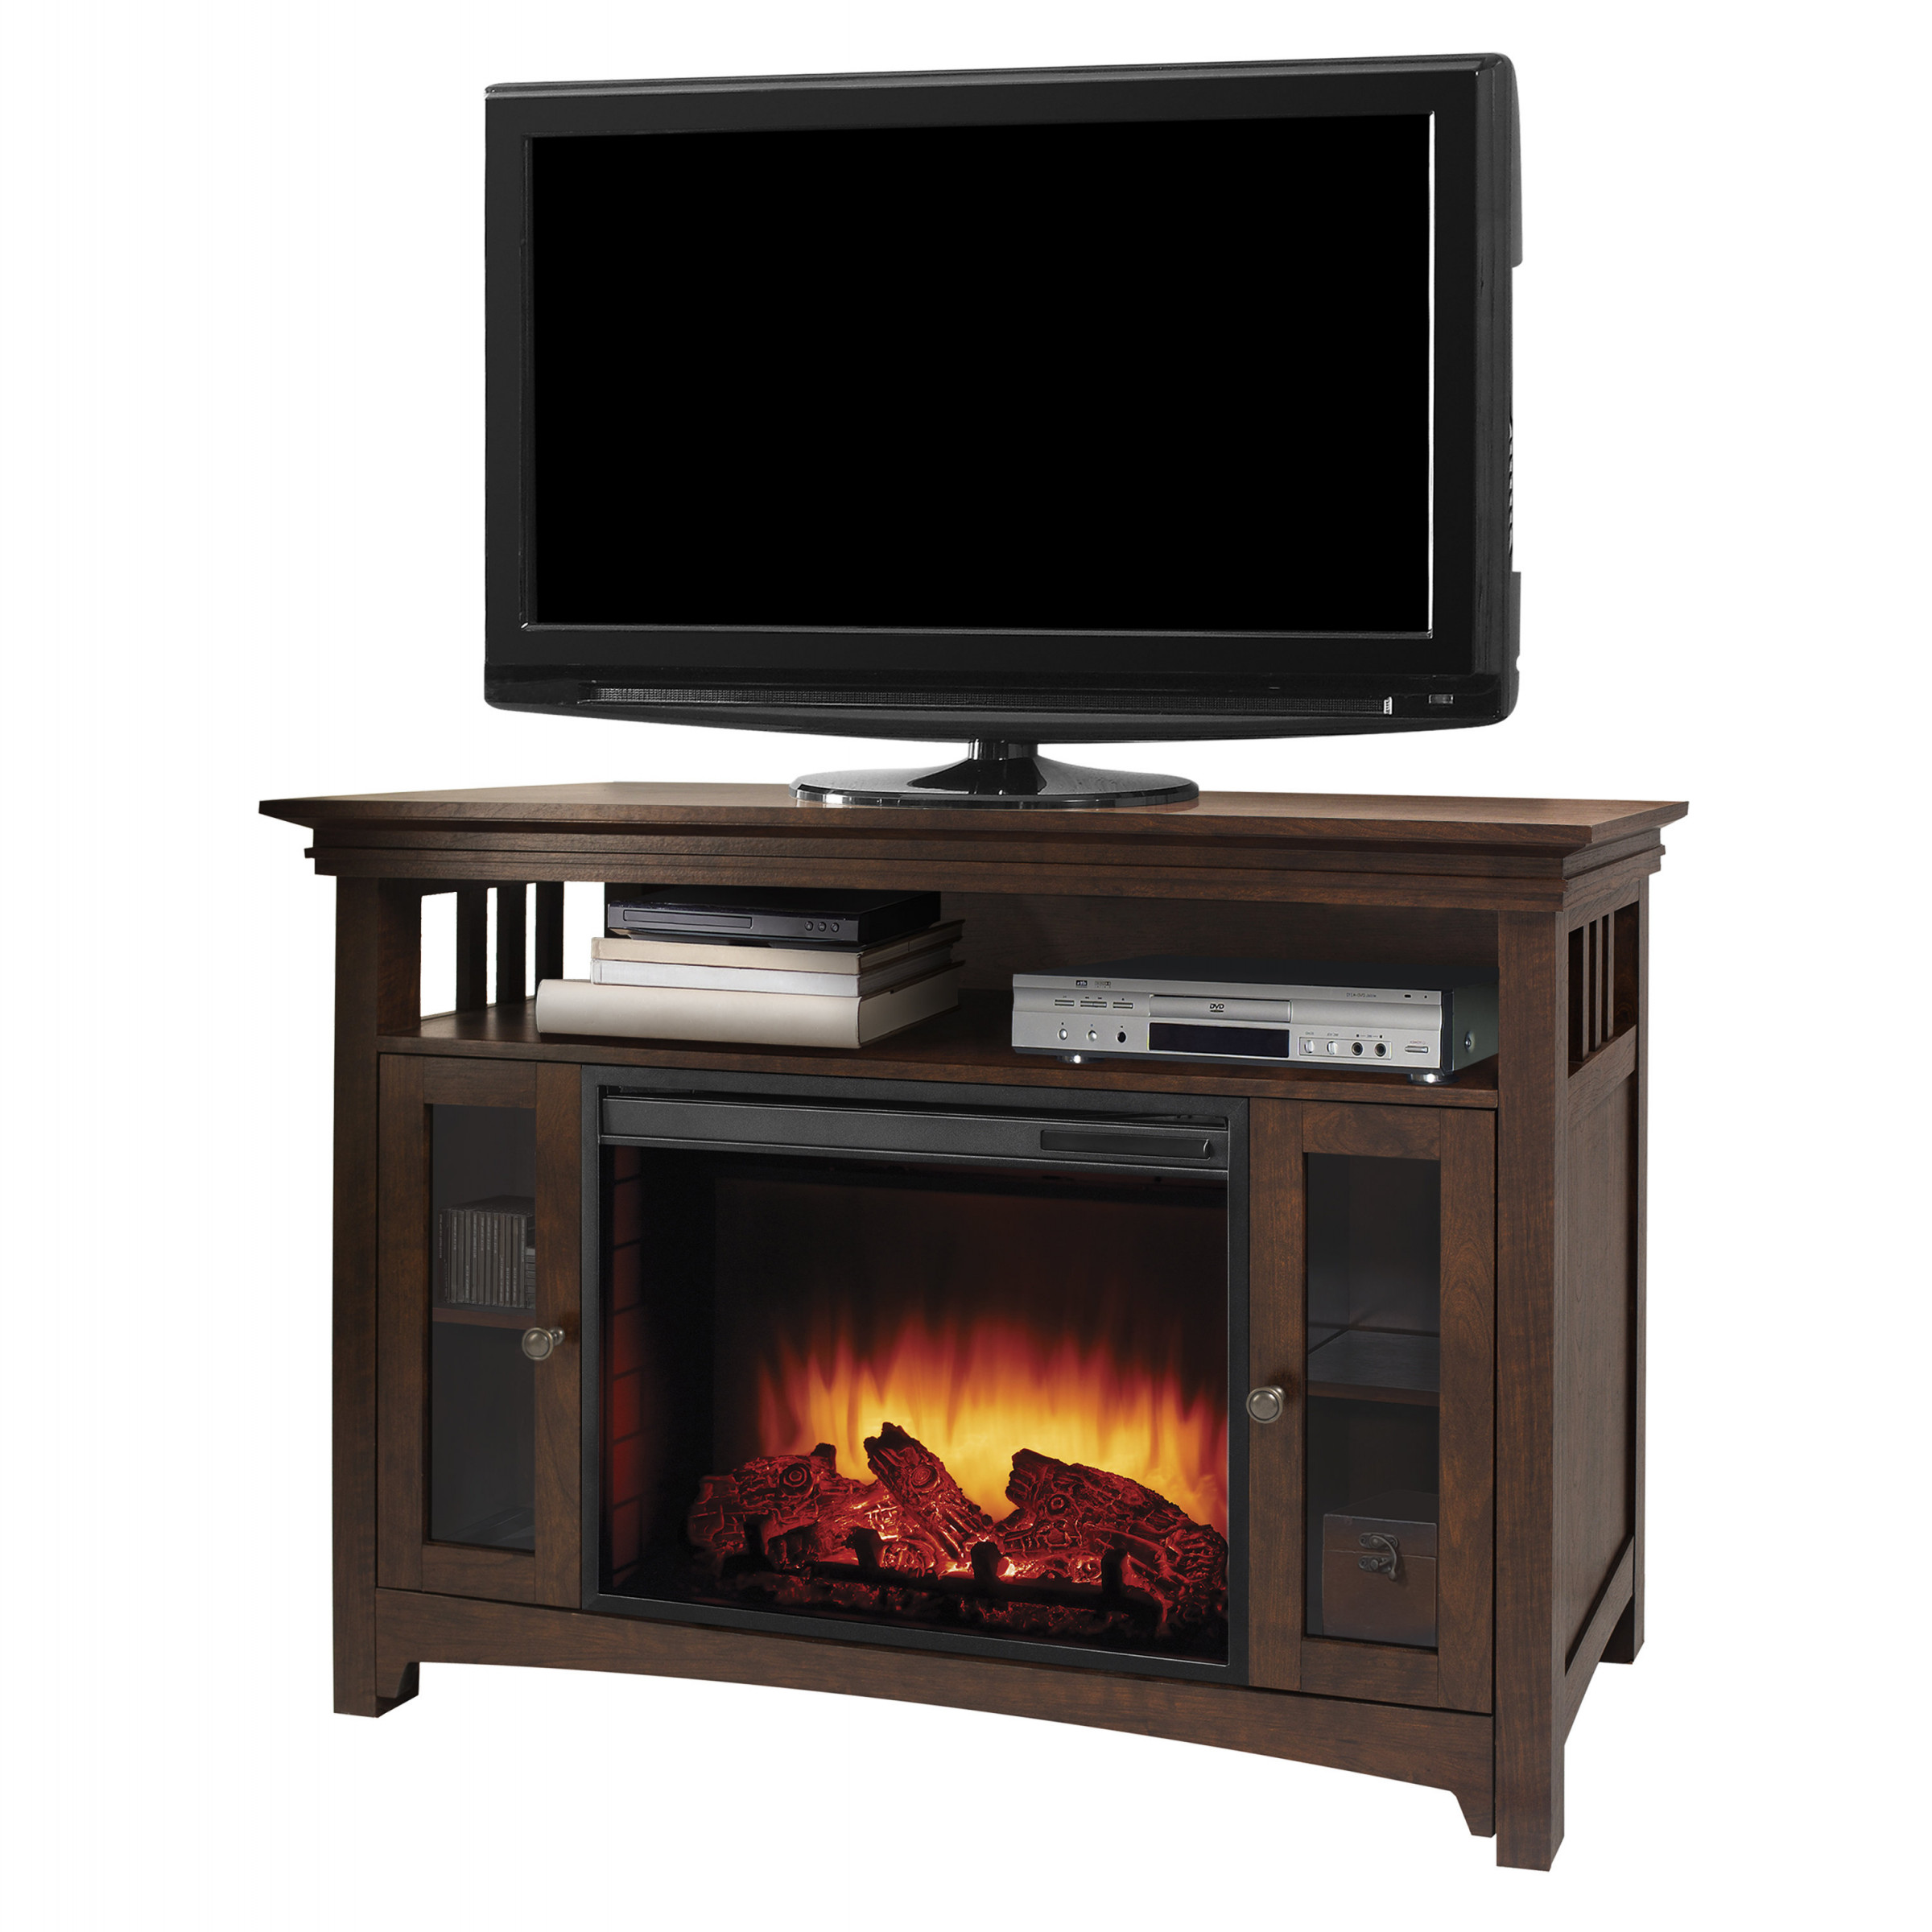 White Fireplace Tv Stand Luxury 35 Minimaliste Electric Fireplace Tv Stand